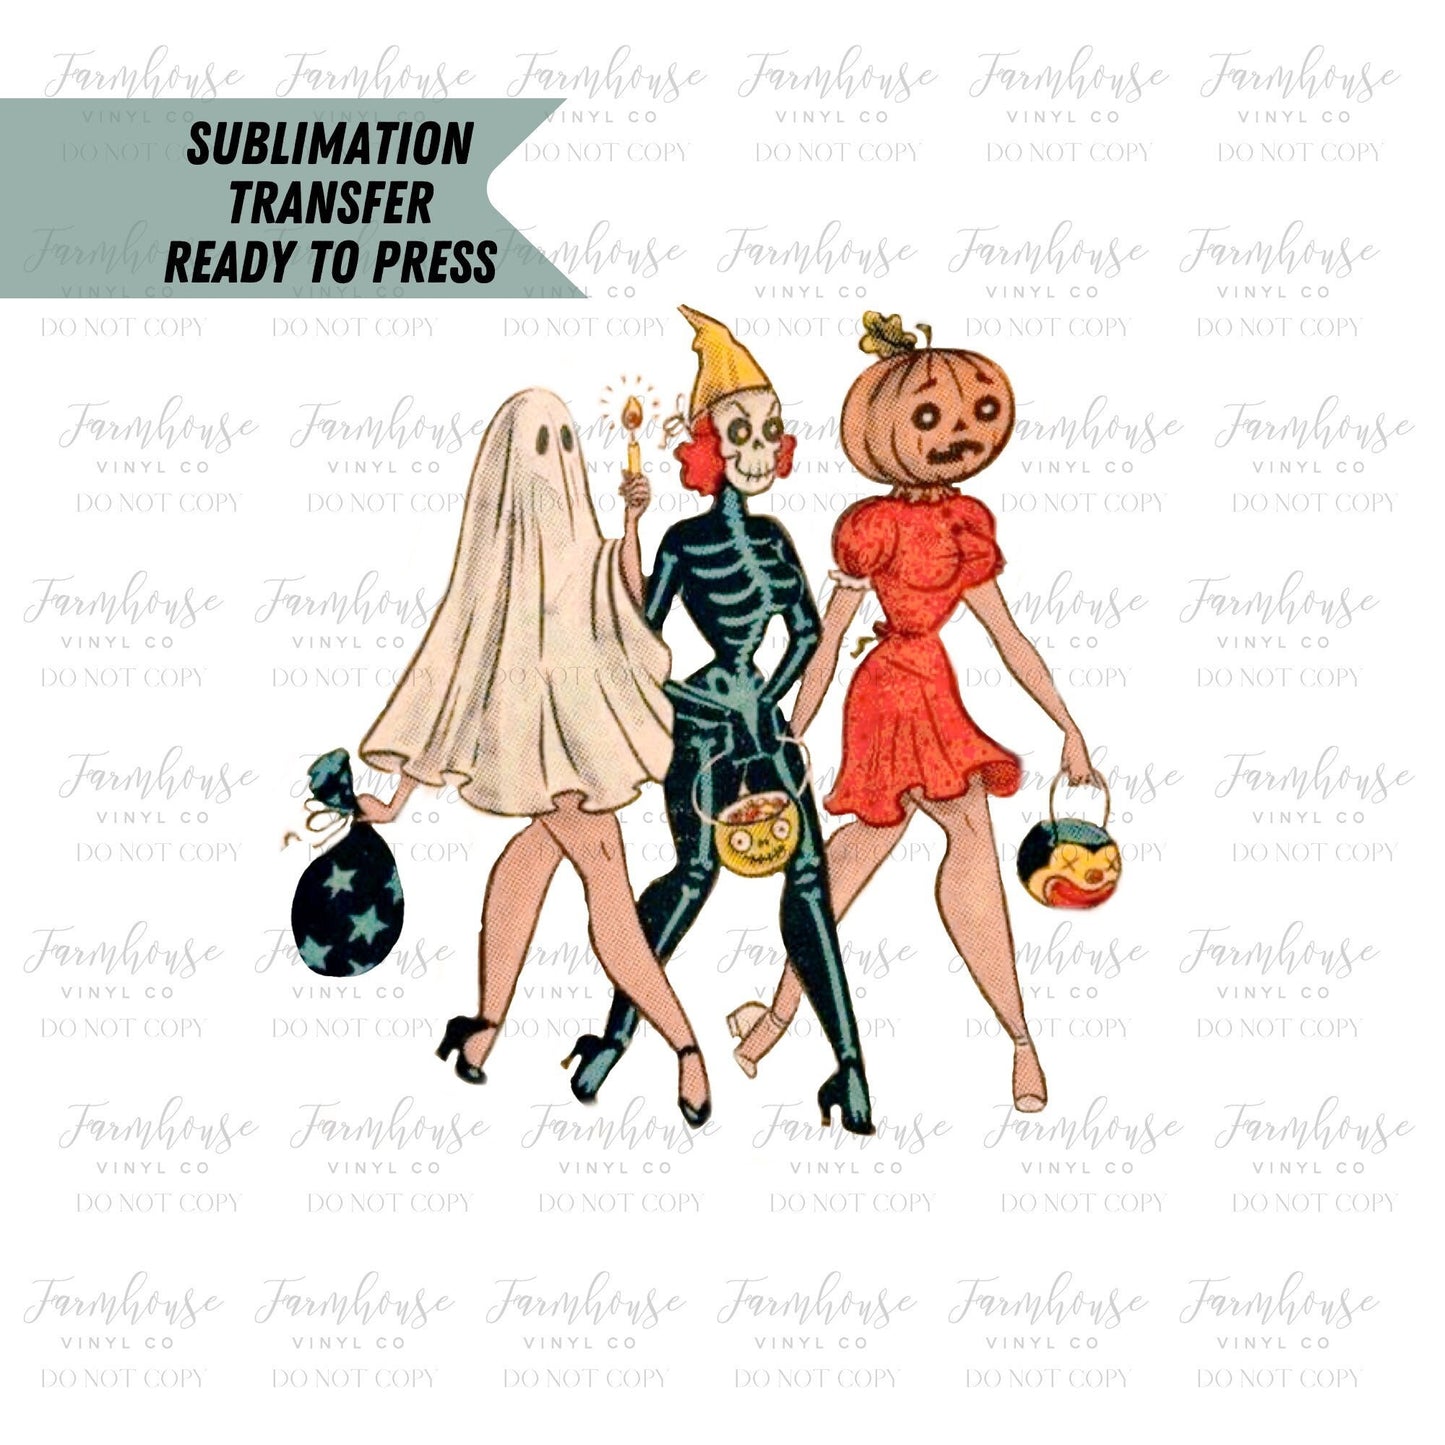 Vintage Pinup Halloween Costumes, Halloween Sublimation Transfer, Trick or Treat Design, Sublimation Transfer Ready Press, Fall Transfer - Farmhouse Vinyl Co